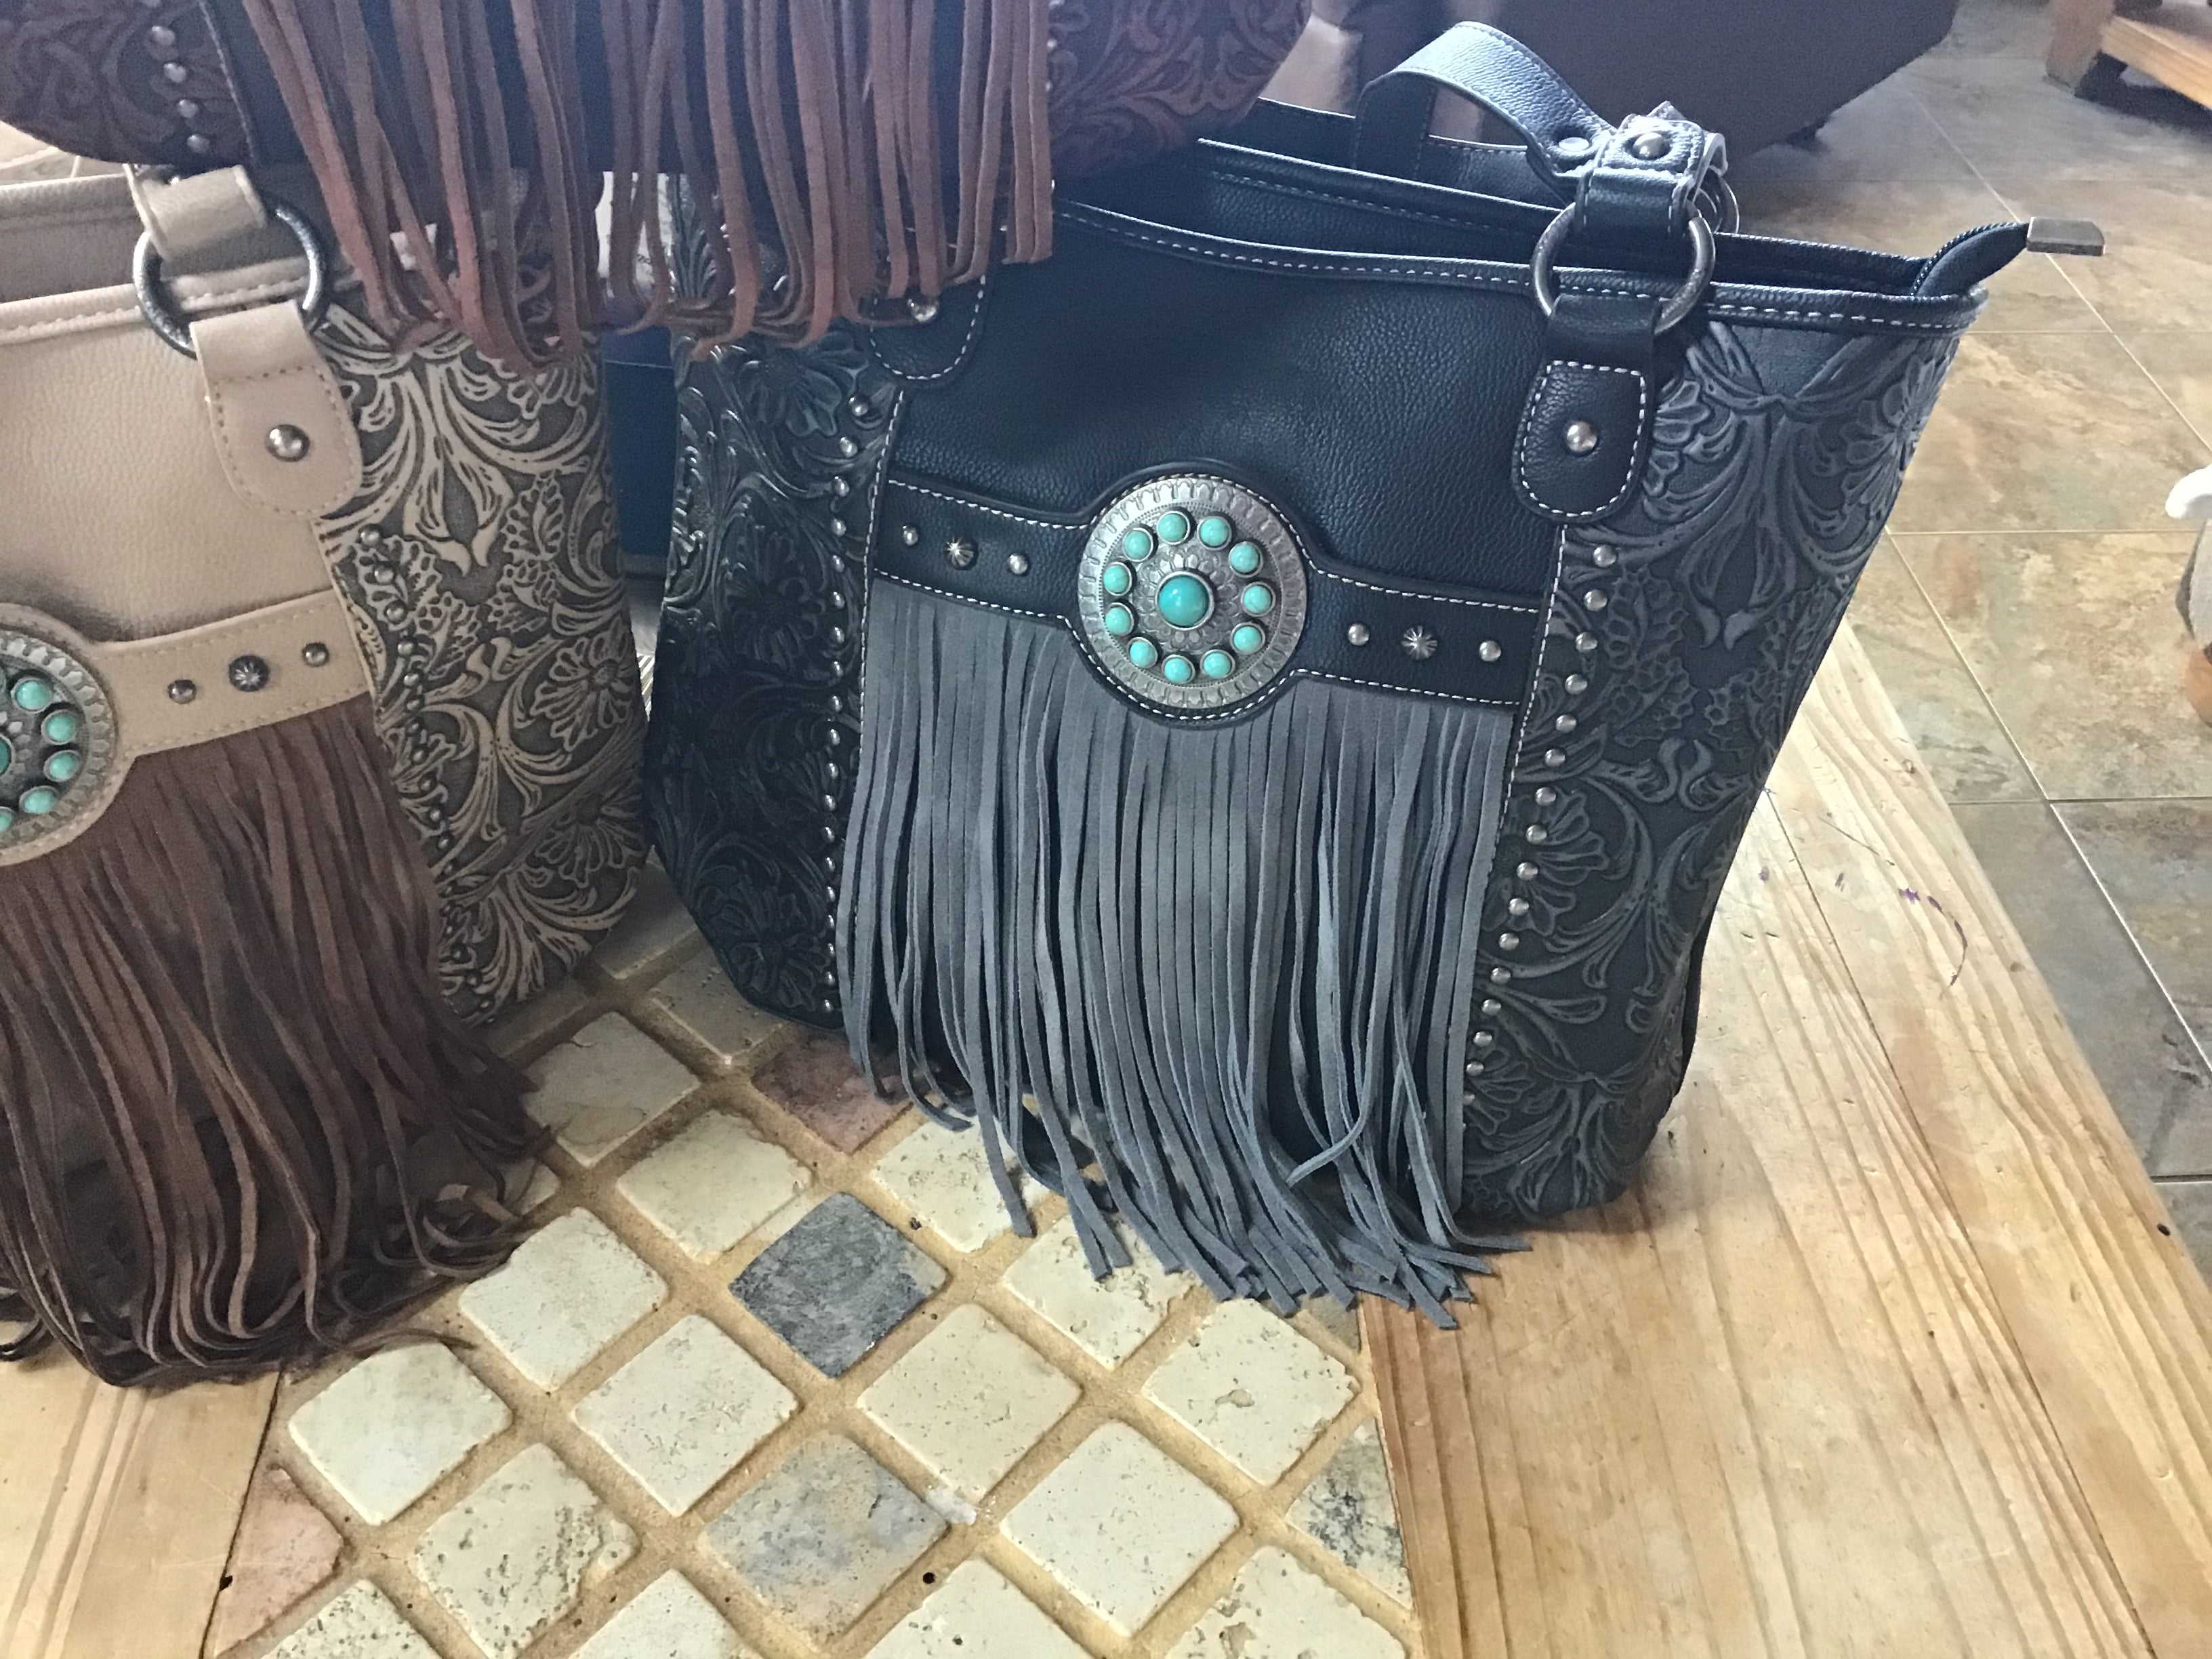 Fringe Collection Concealed Carry Tote